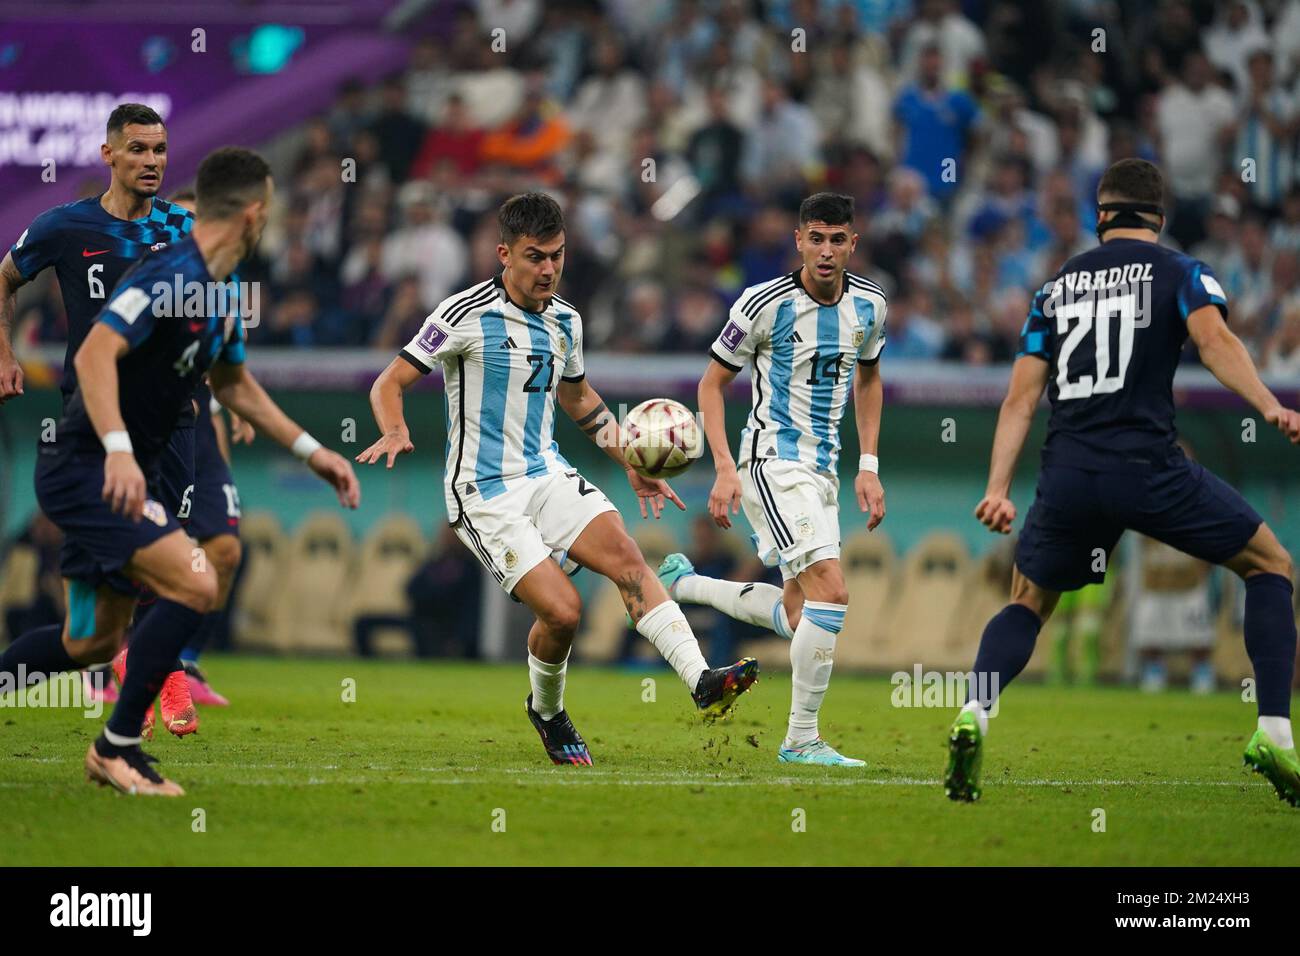 DOHA, QATAR - DECEMBER 13: Player of Argentina Paulo Dybala passes the ball during the FIFA World Cup Qatar 2022 Semi-finals match between Argentina and Croatia at Lusail Stadium on December 13, 2022 in Lusail, Qatar. (Photo by Florencia Tan Jun/PxImages) Stock Photo